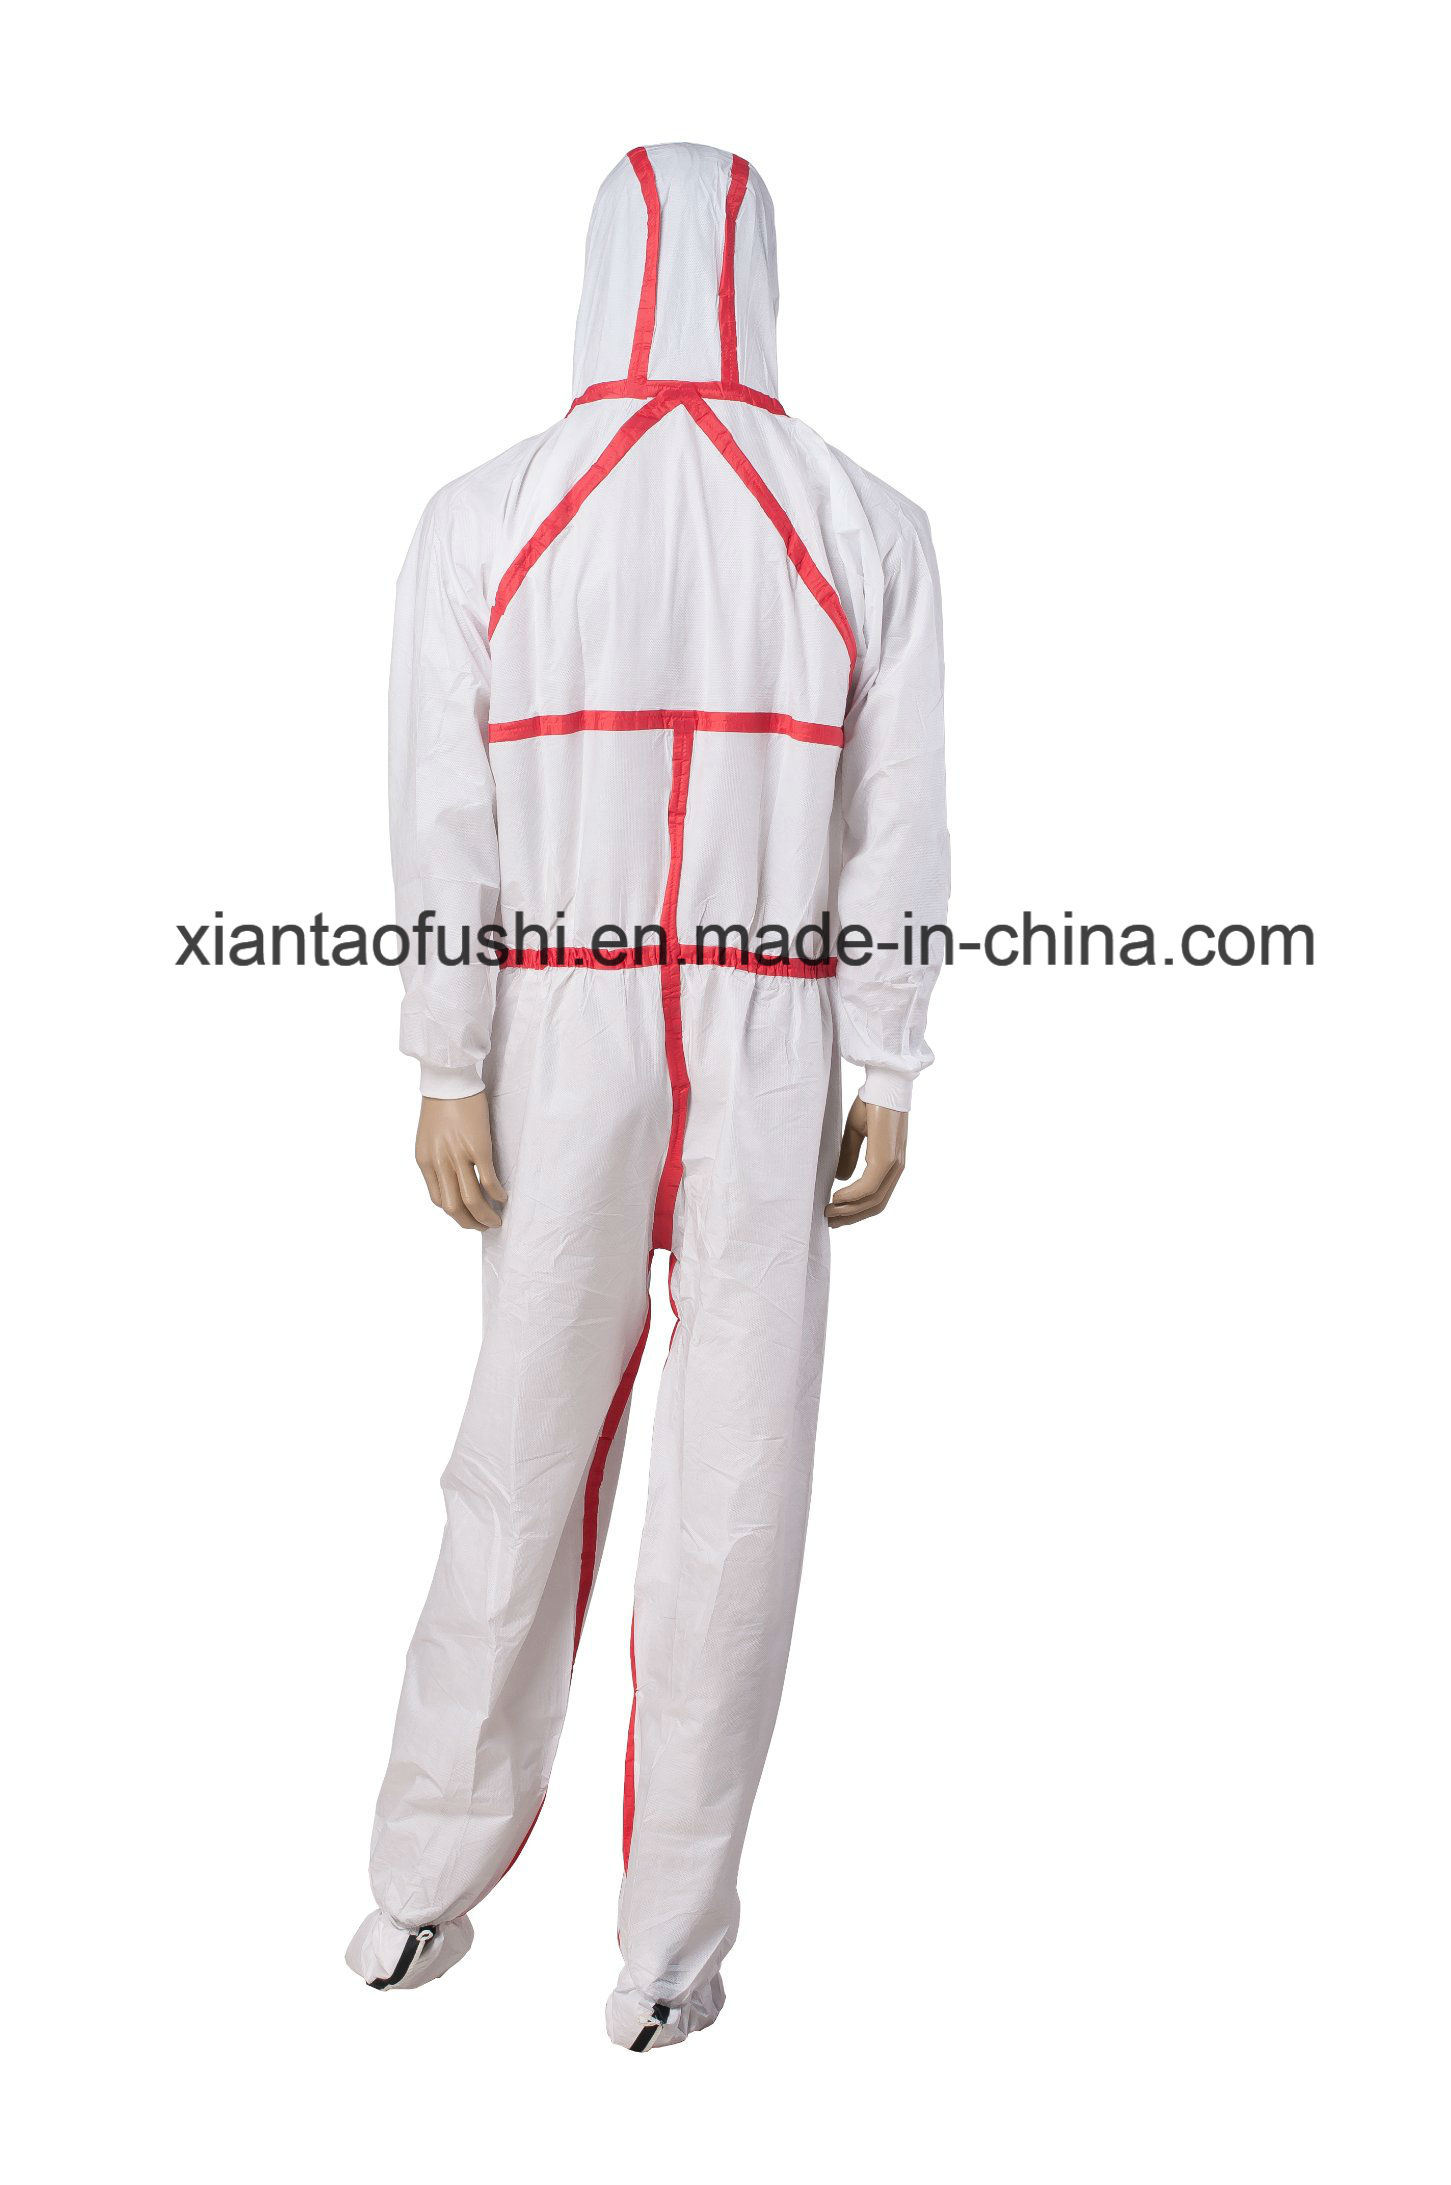 Waterproof Surgical/Medical/Hospital/Plastic/Polyethylene/Poly/PE/PP+PE/PP/SMS/Overall/Polypropylene Nonwoven Disposable Protective Gown, Disposable Coverall